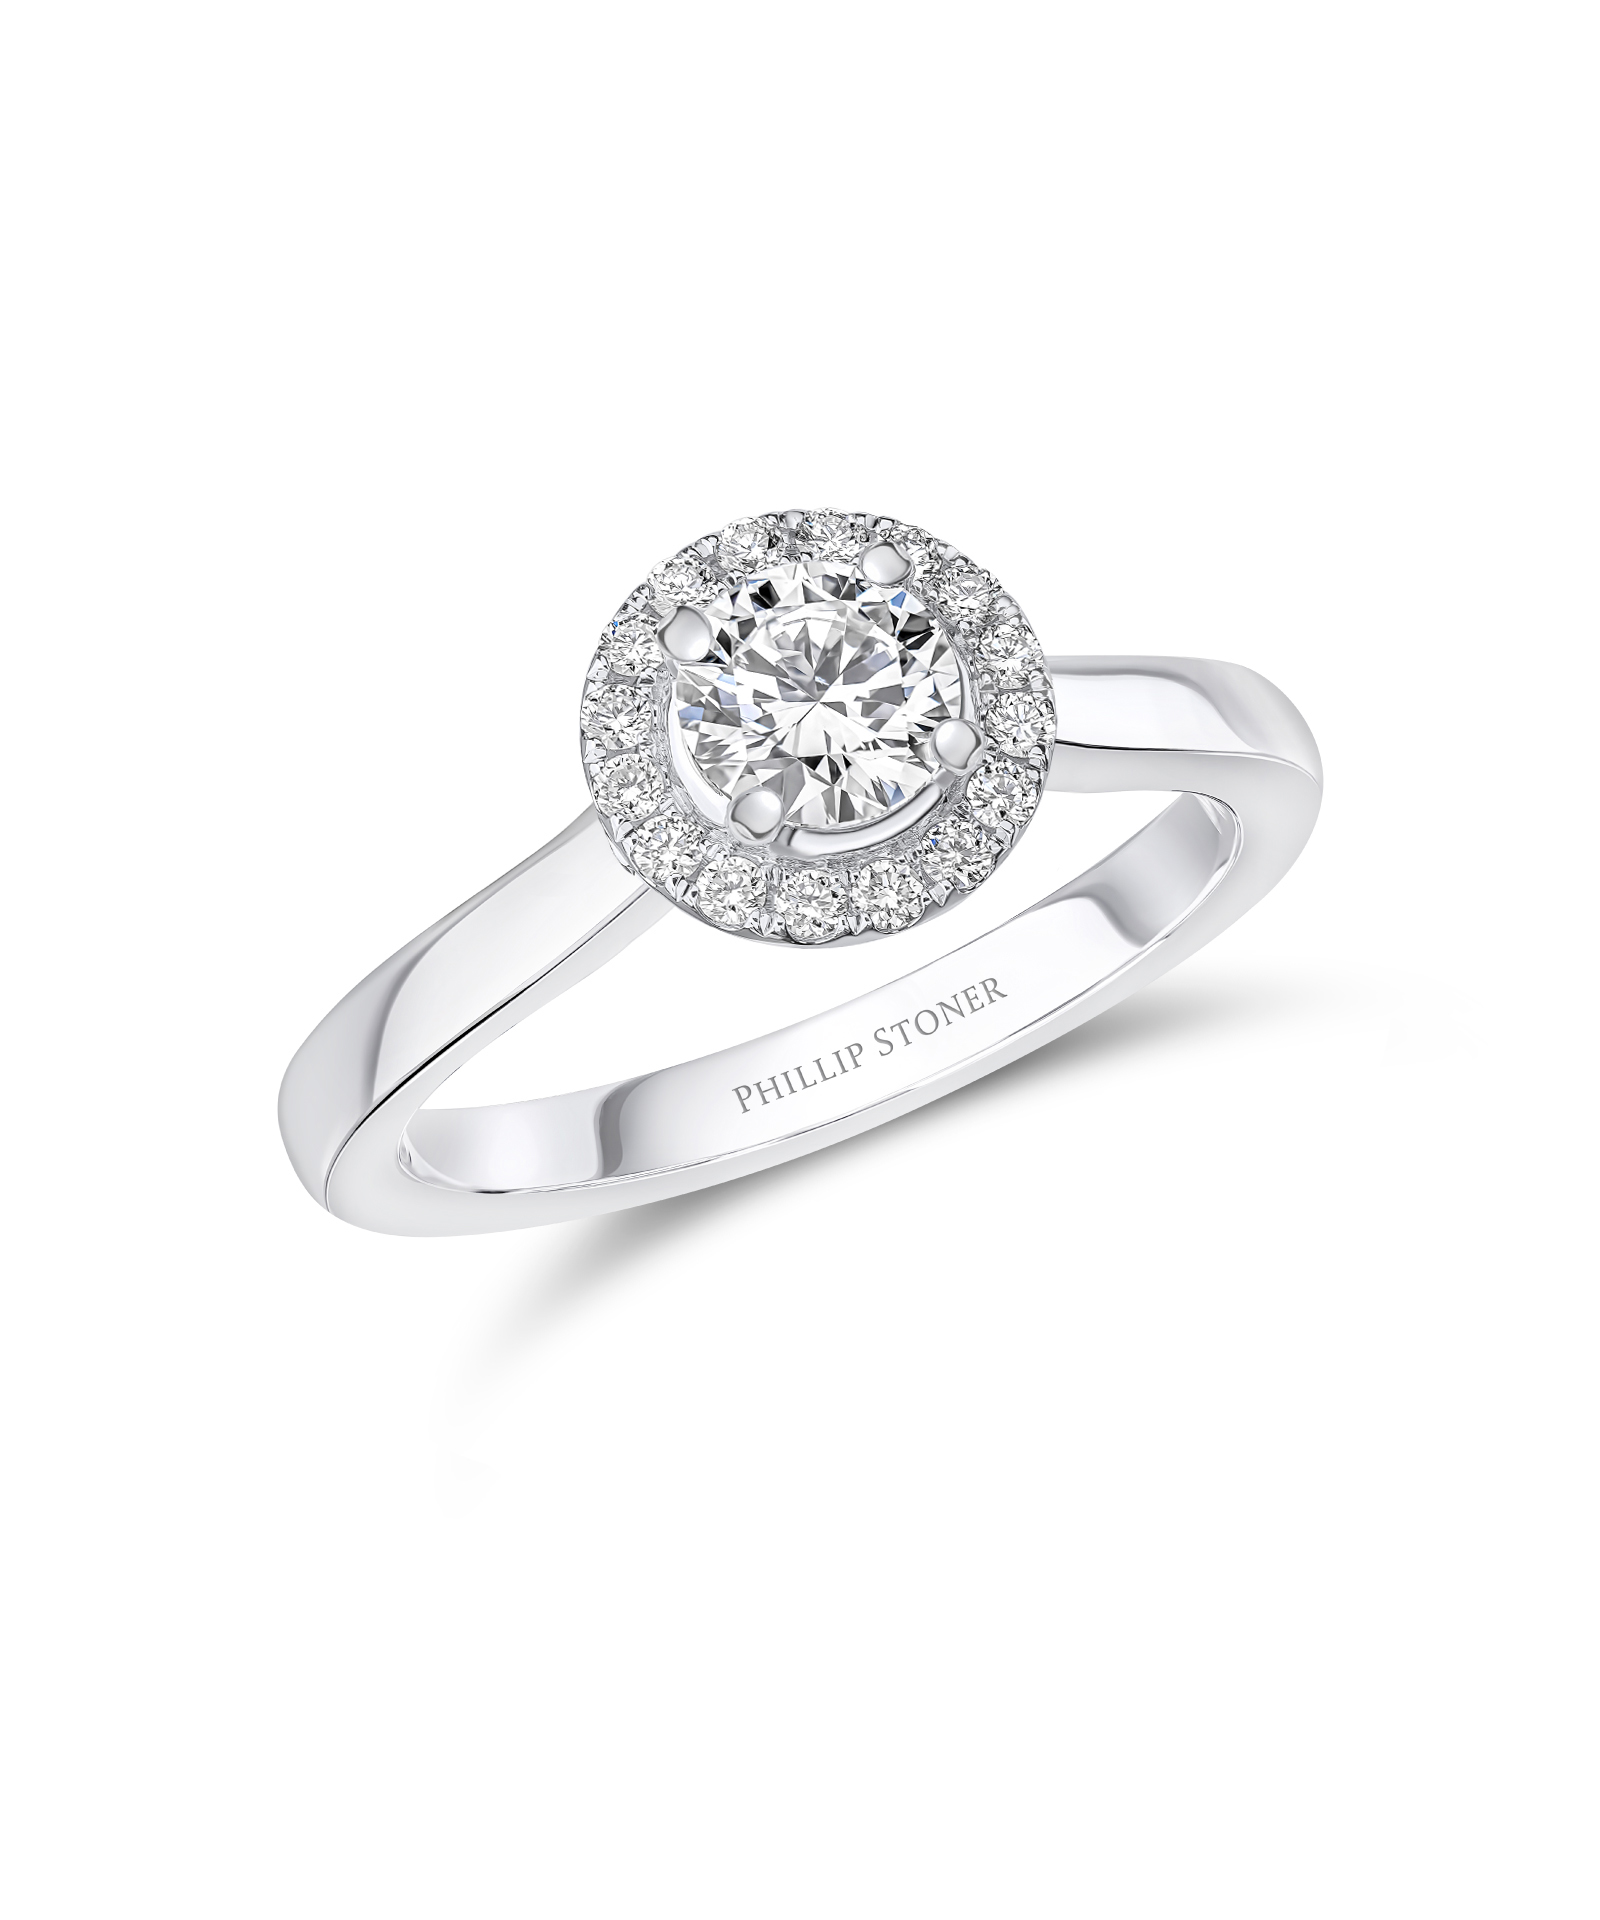 0.50ct Round Brilliant Cut Diamond Halo Engagement Ring with Plain Shoulders - Phillip Stoner The Jeweller